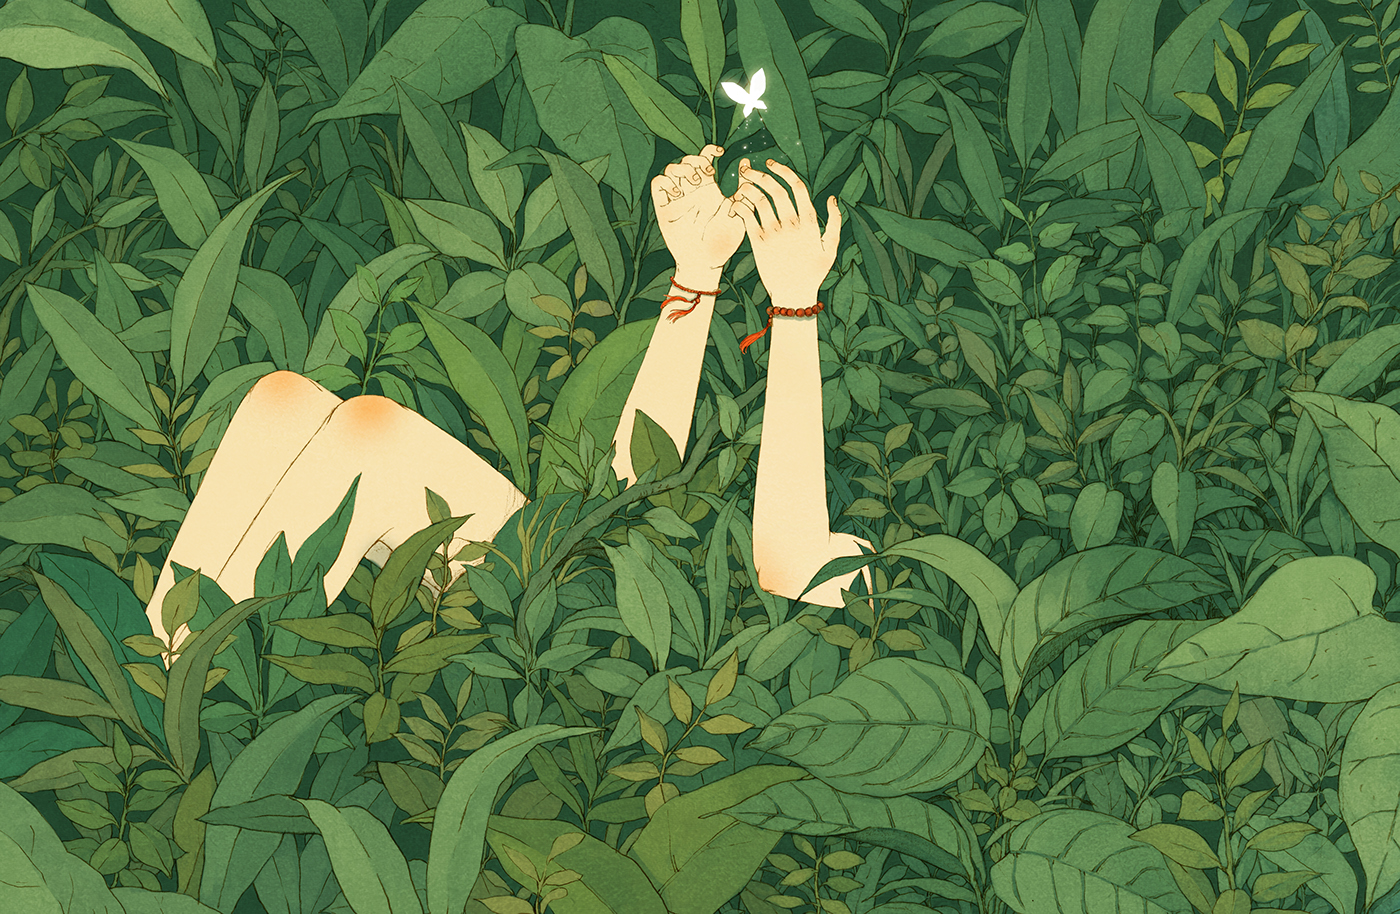 Beautiful Storybook Illustrations of People Communing with Nature by Jin Xingye